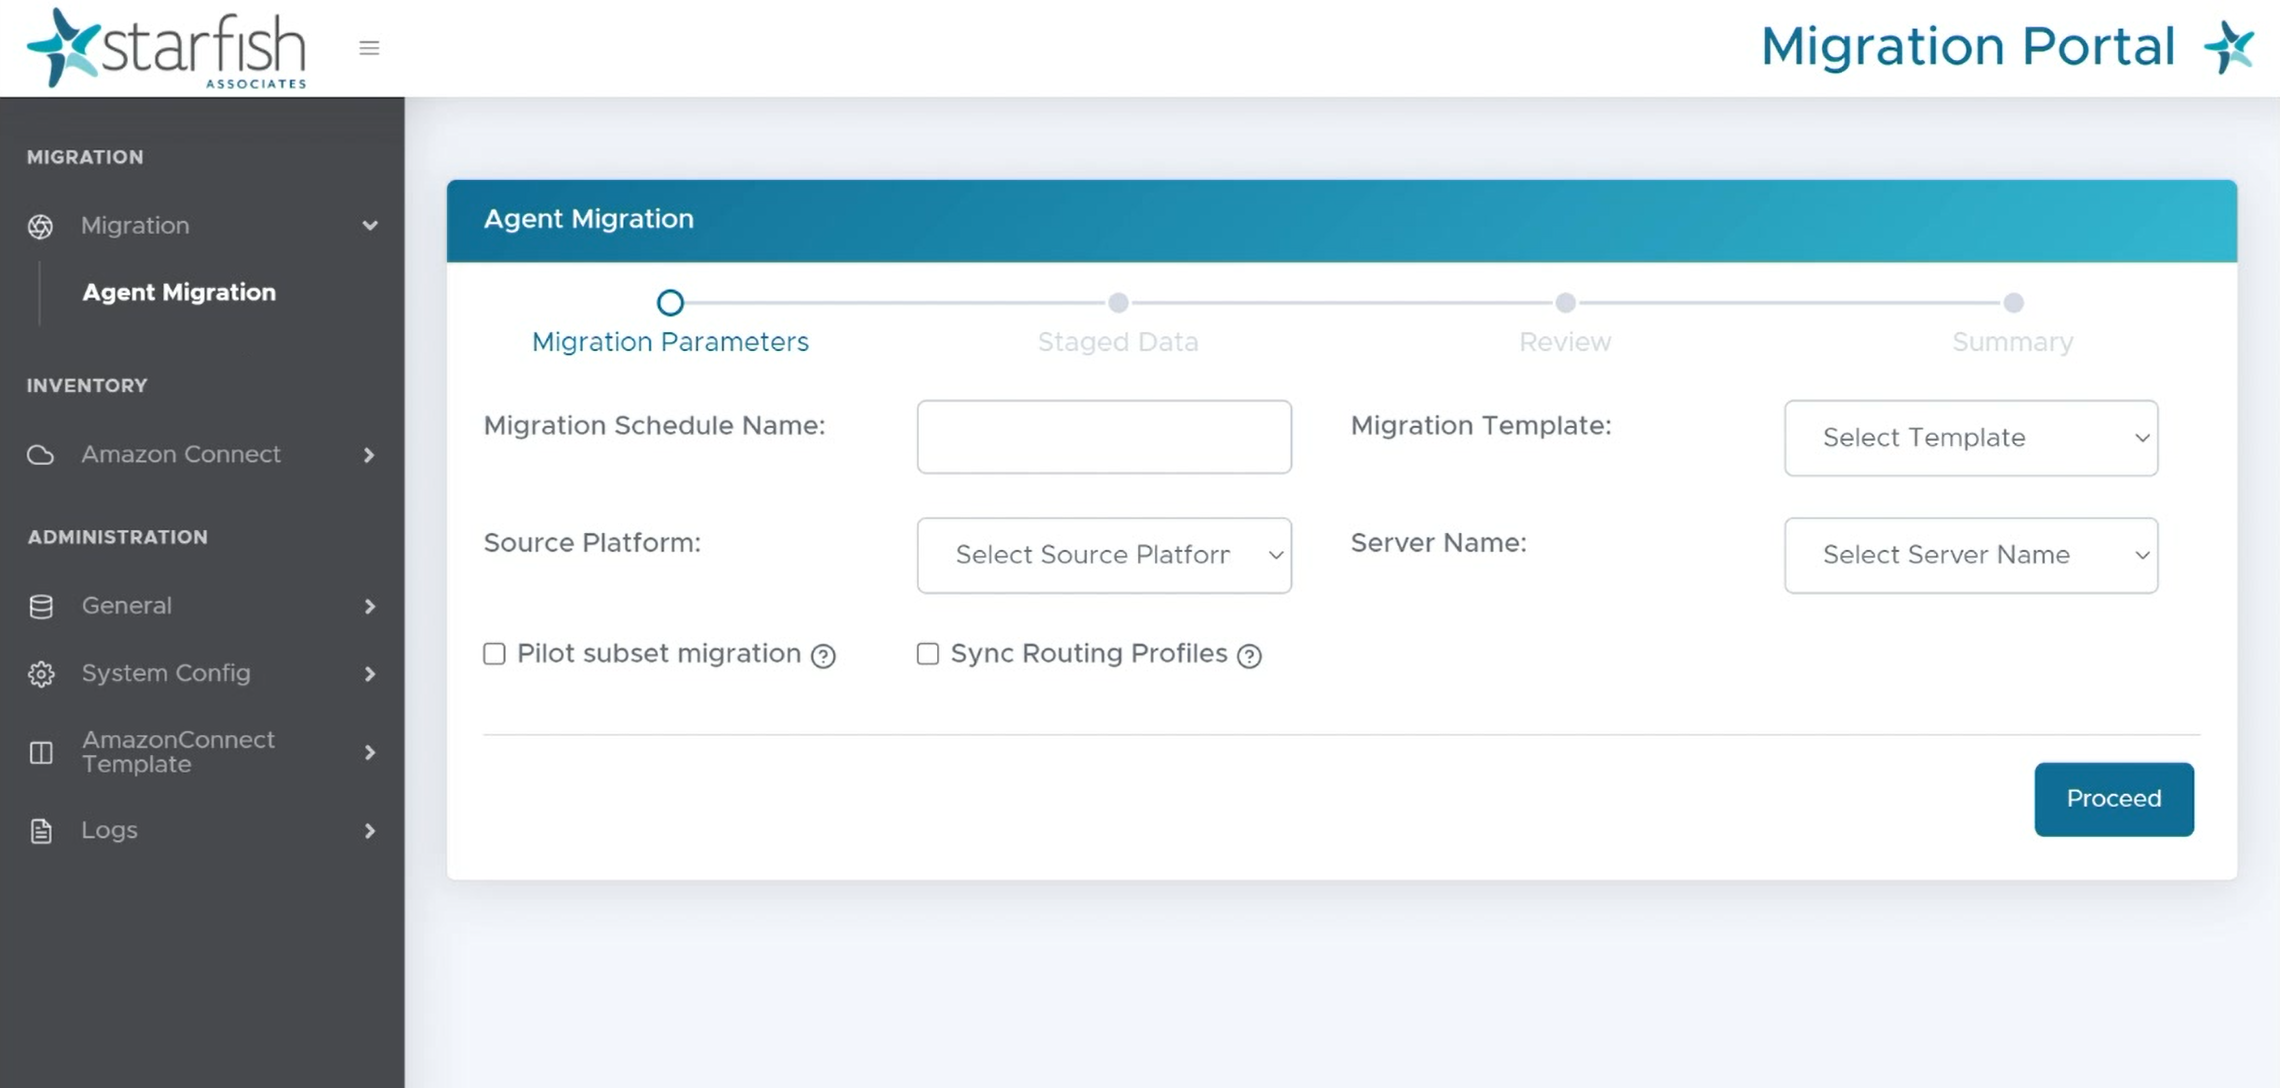 UI for Migration Solution for Amazon Connect, showing how system administrators can easily manage agents. The tab "Agent Migration" is selected on the toolbar and the main screen shows where the migration parameters are set. Admins can then just click a button to "proceed".